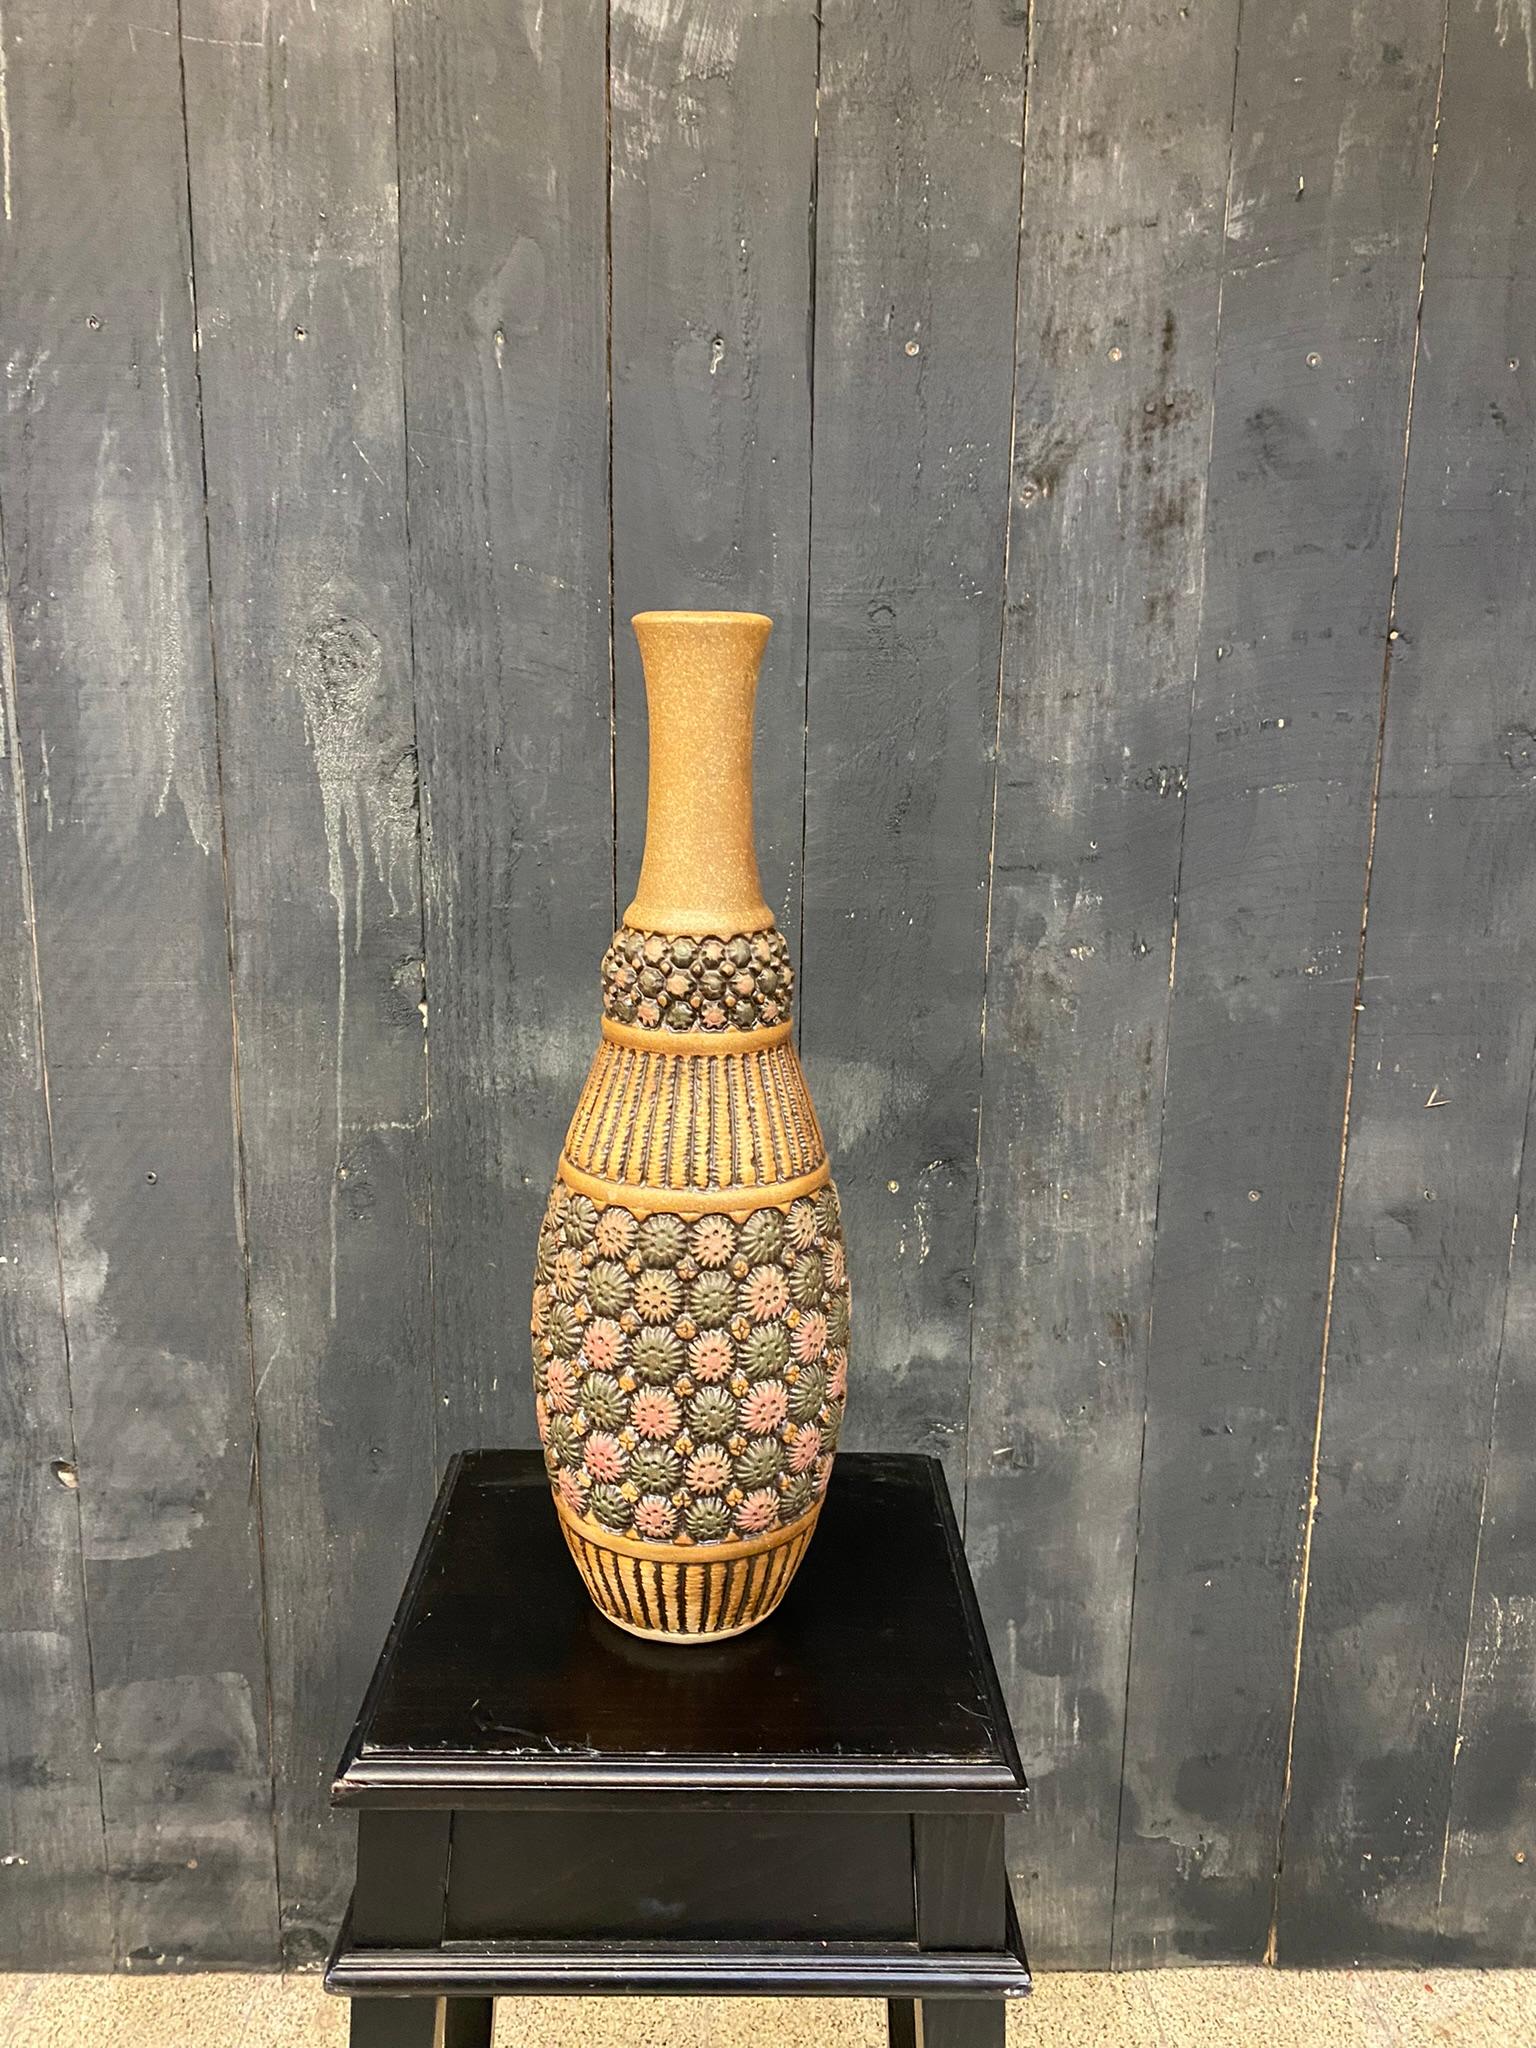 Mougin a Nancy. Vase with a stretched neck in sandstone with flower seedings details signed Joseph Mougin.